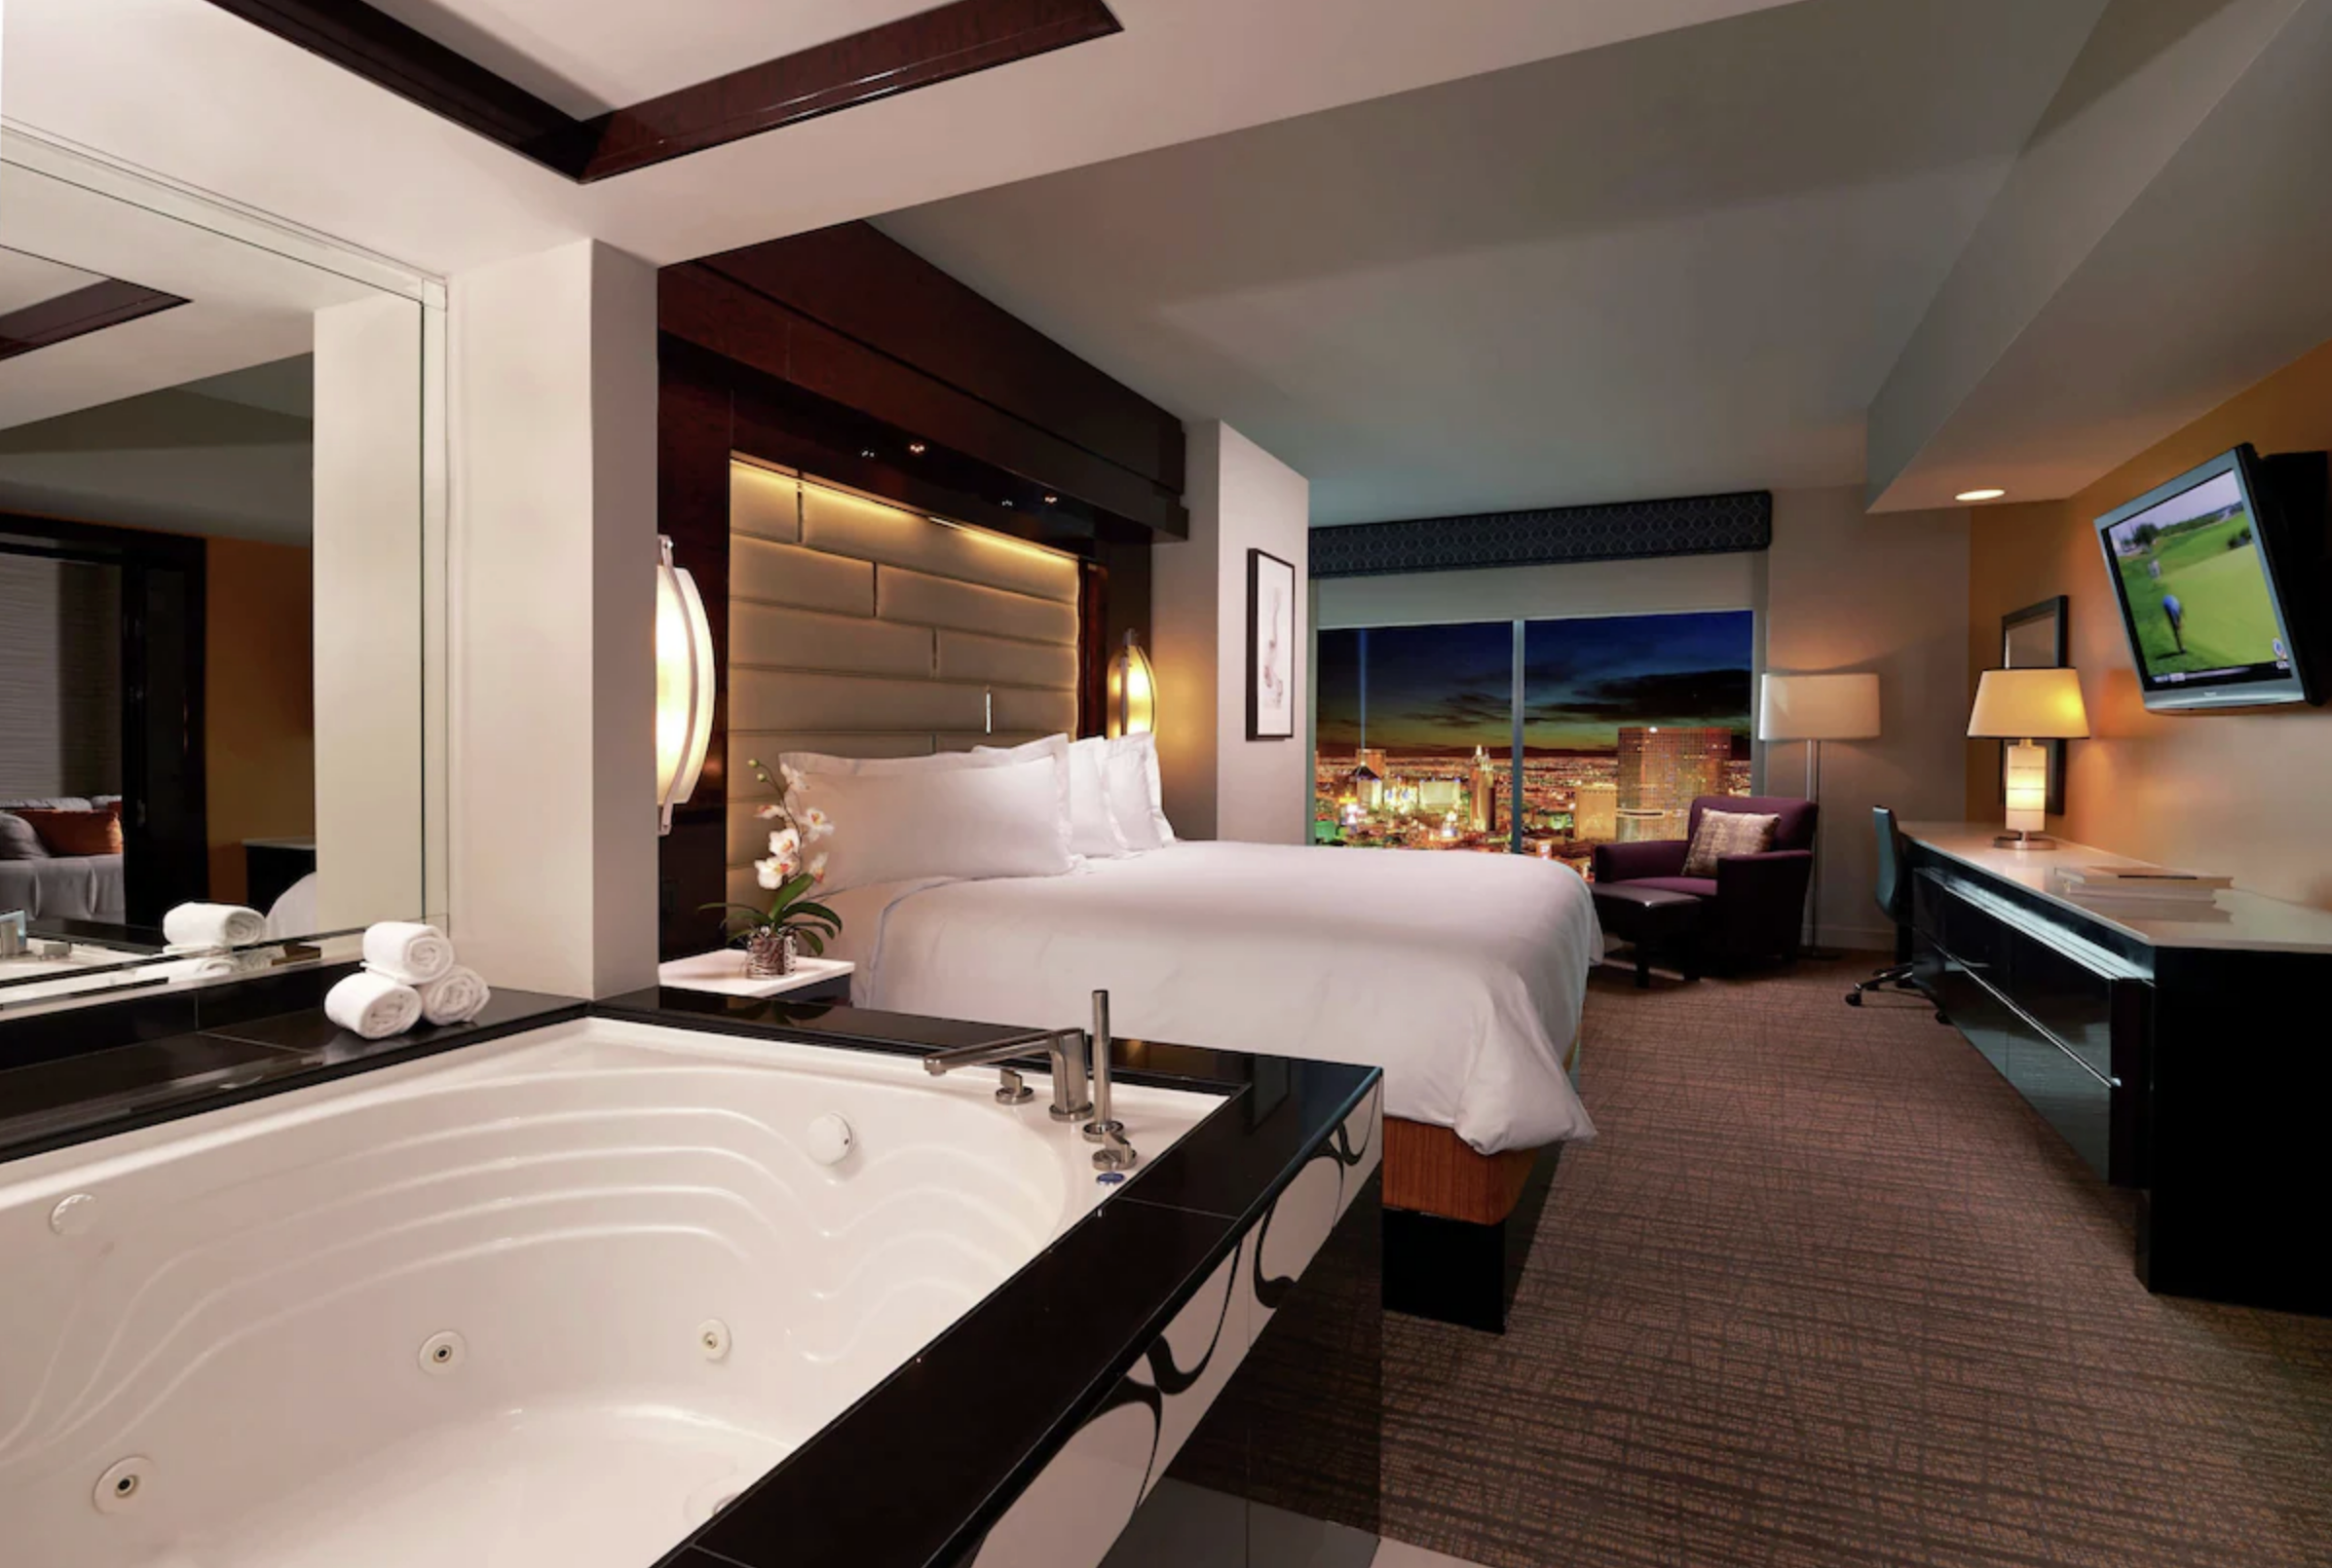 5 Stunning Hotels With Hot Tubs in Vancouver - Luxury Travel Babe Blog